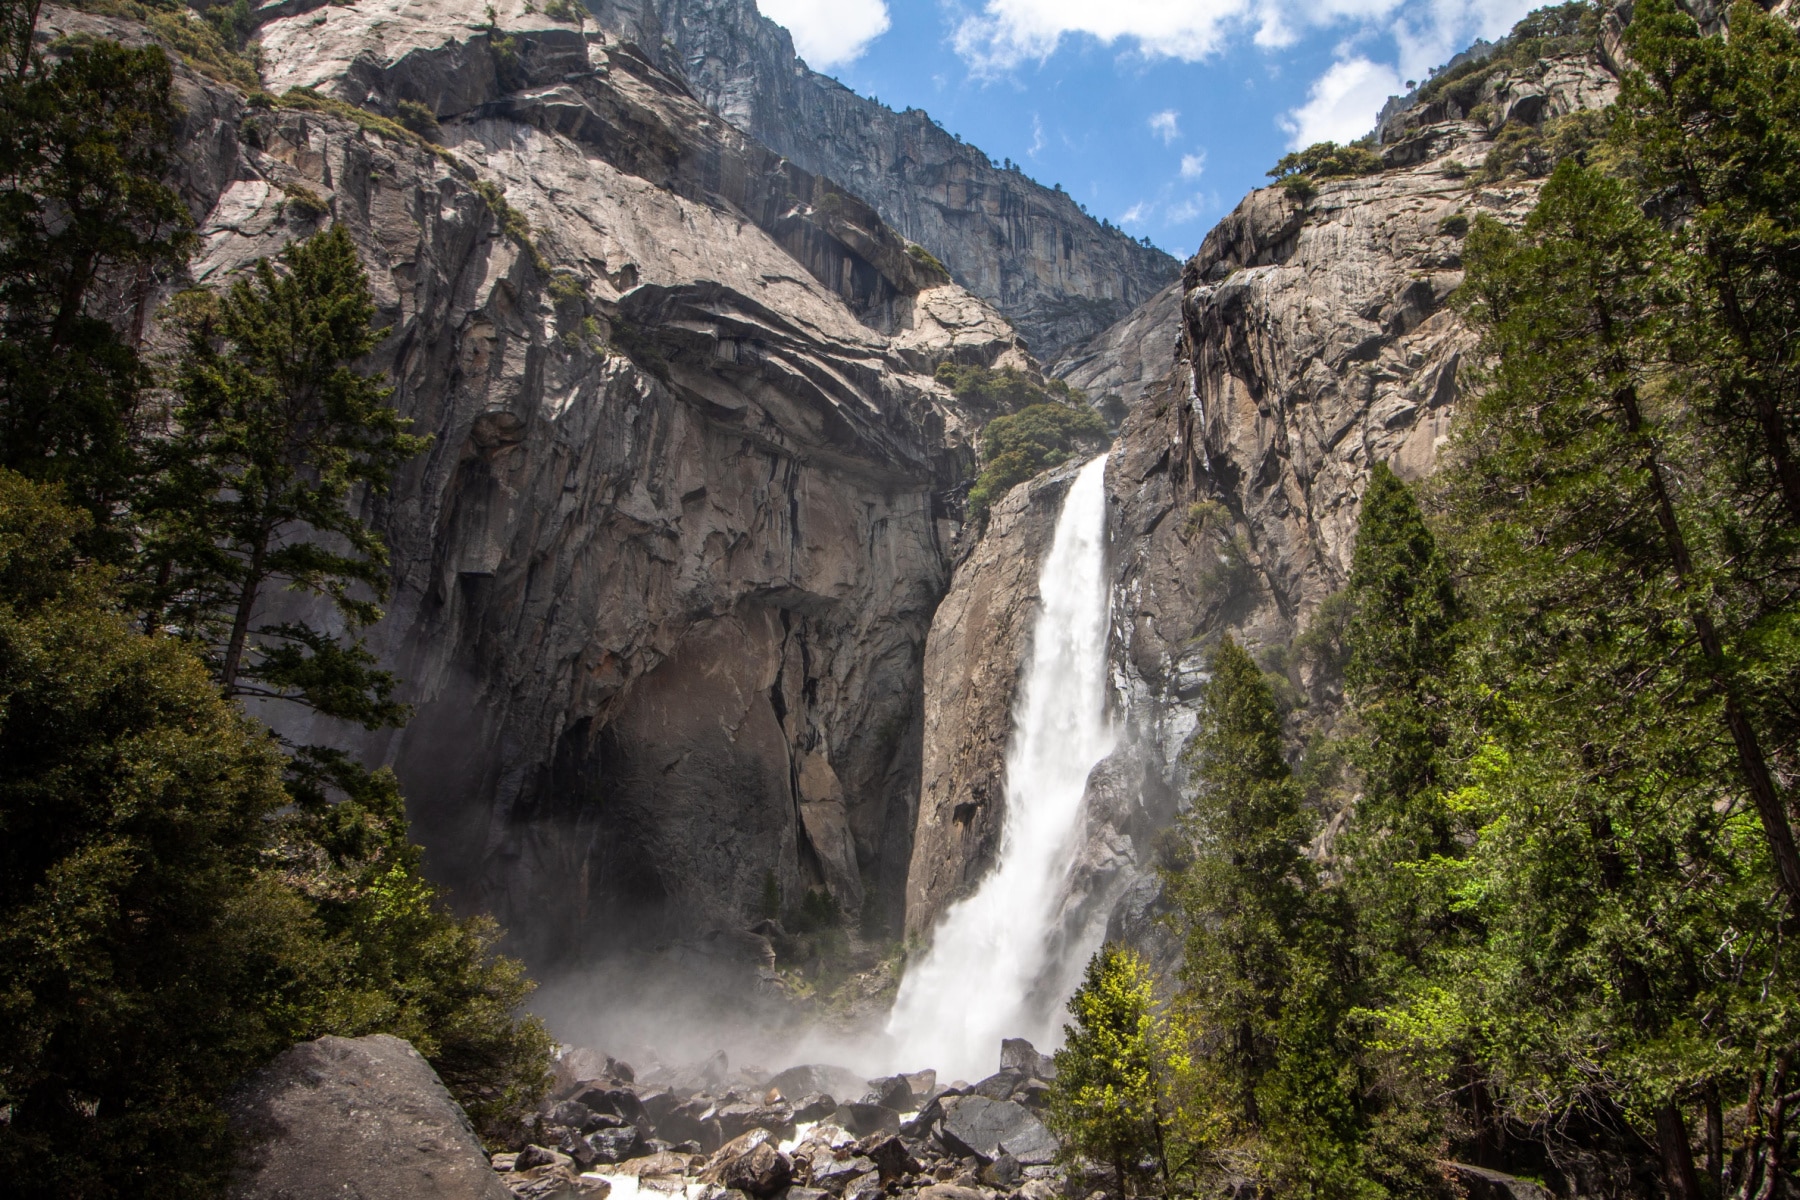 Lower Yosemite Falls in spring. One of the must see stops on the Yosemite to Sequoia National Park Majestic Mountain Loop.